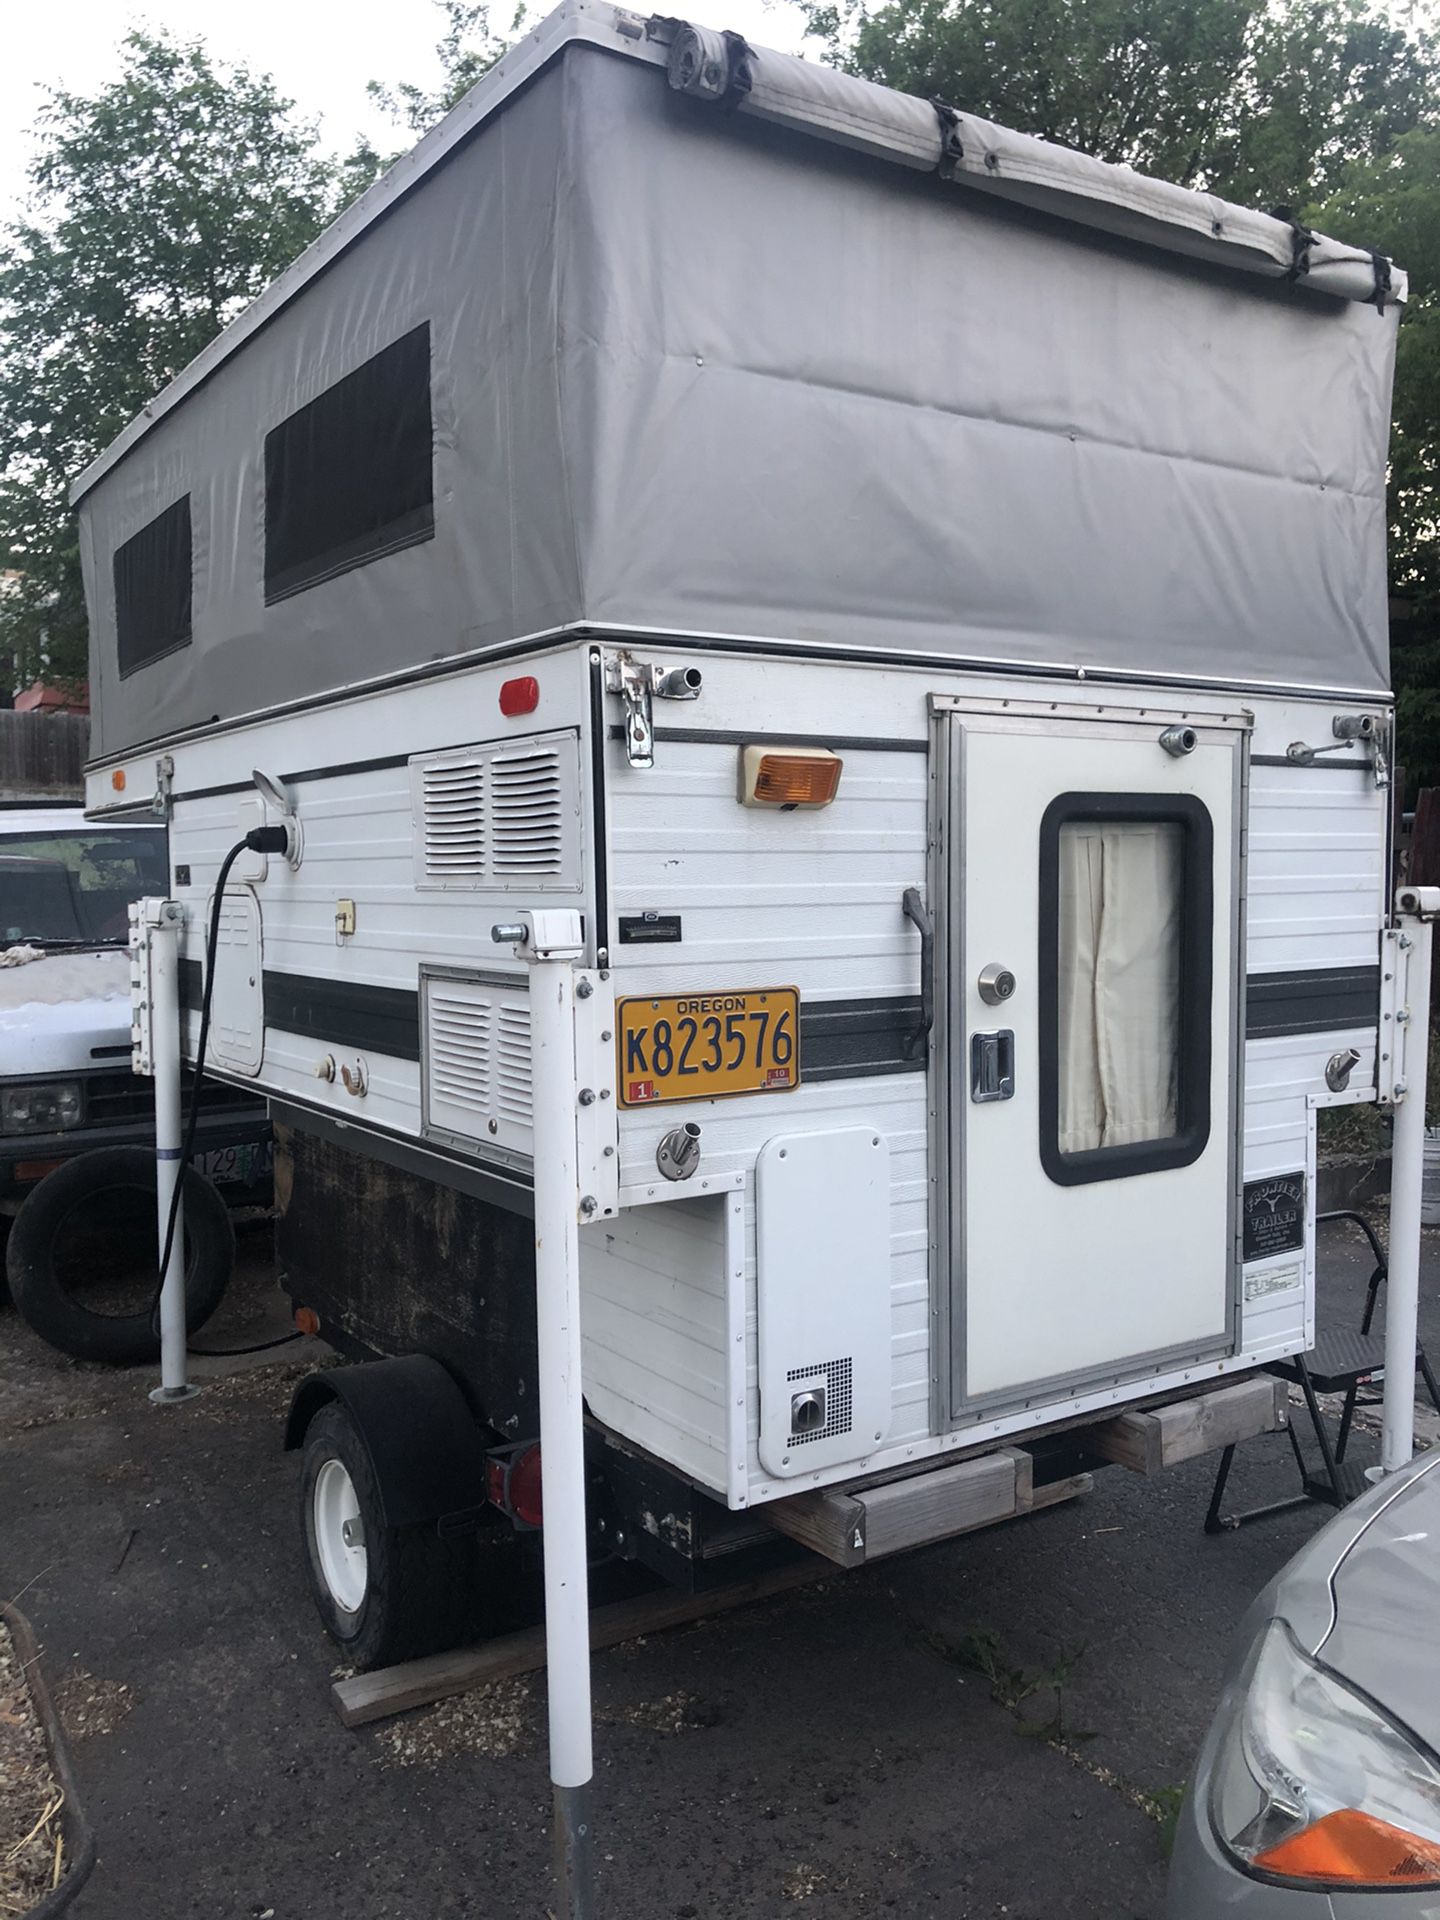 07 four wheel camper mint condition